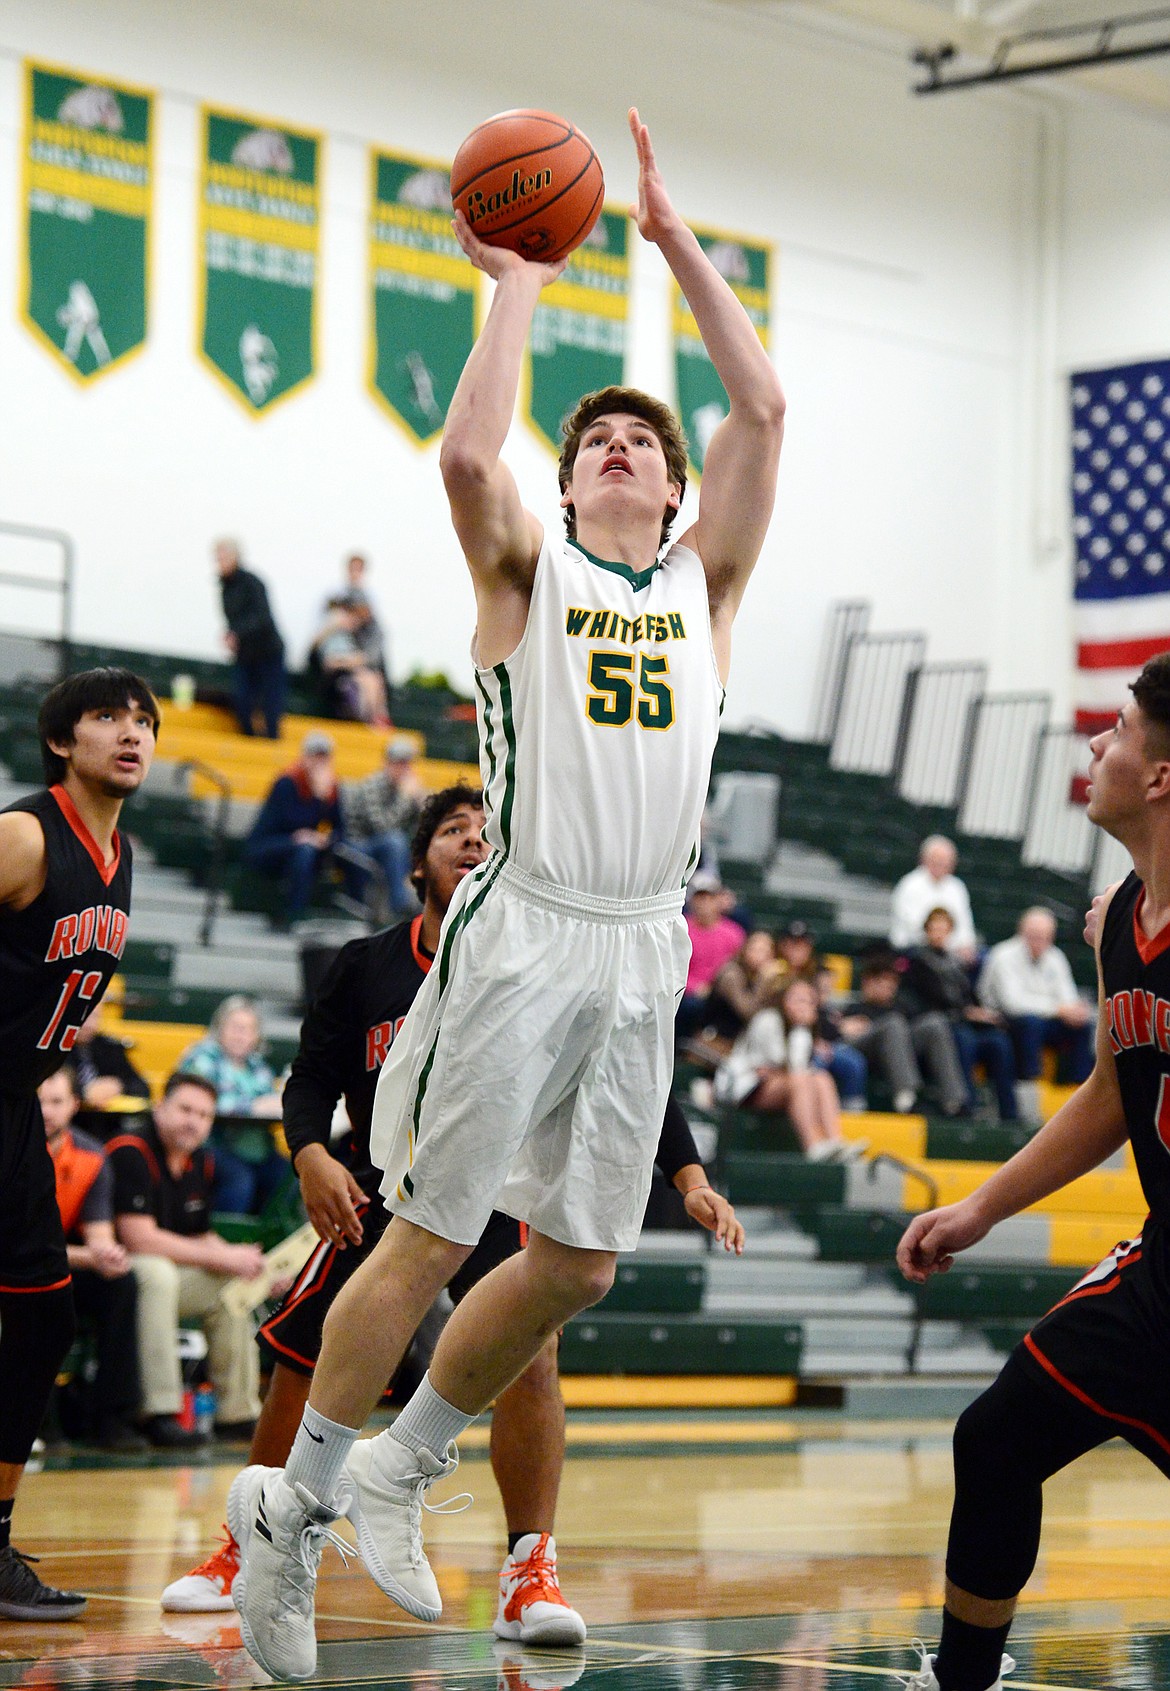 Whitefish's Dillon Botner (55) goes to the hoop against Ronan at Whitefish High School on Tuesday. (Casey Kreider/Daily Inter Lake)